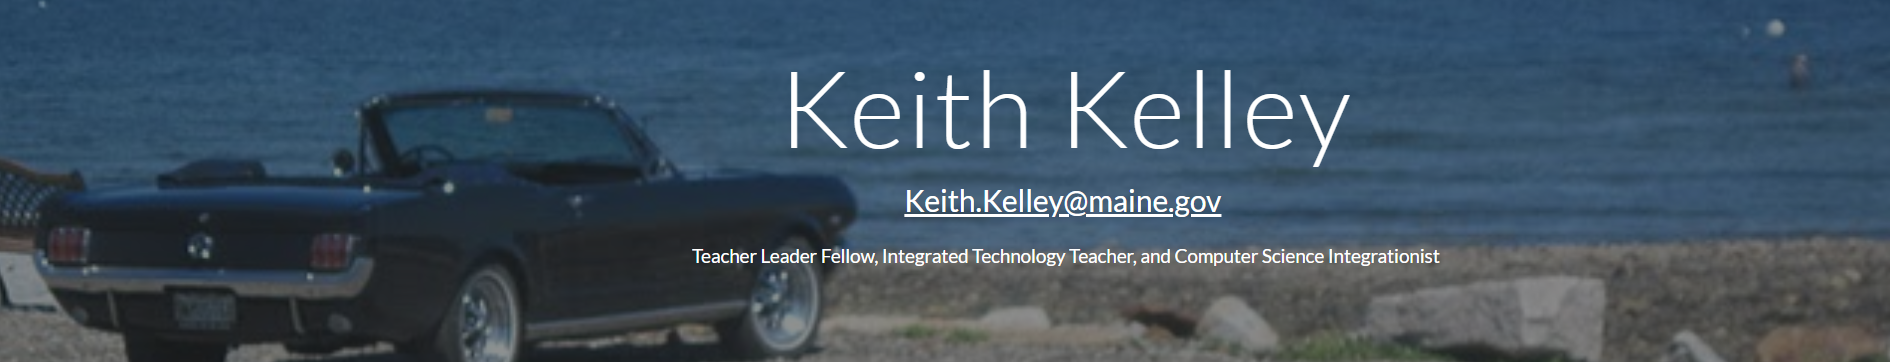 Keith Kelley Title Banner with Car in Background